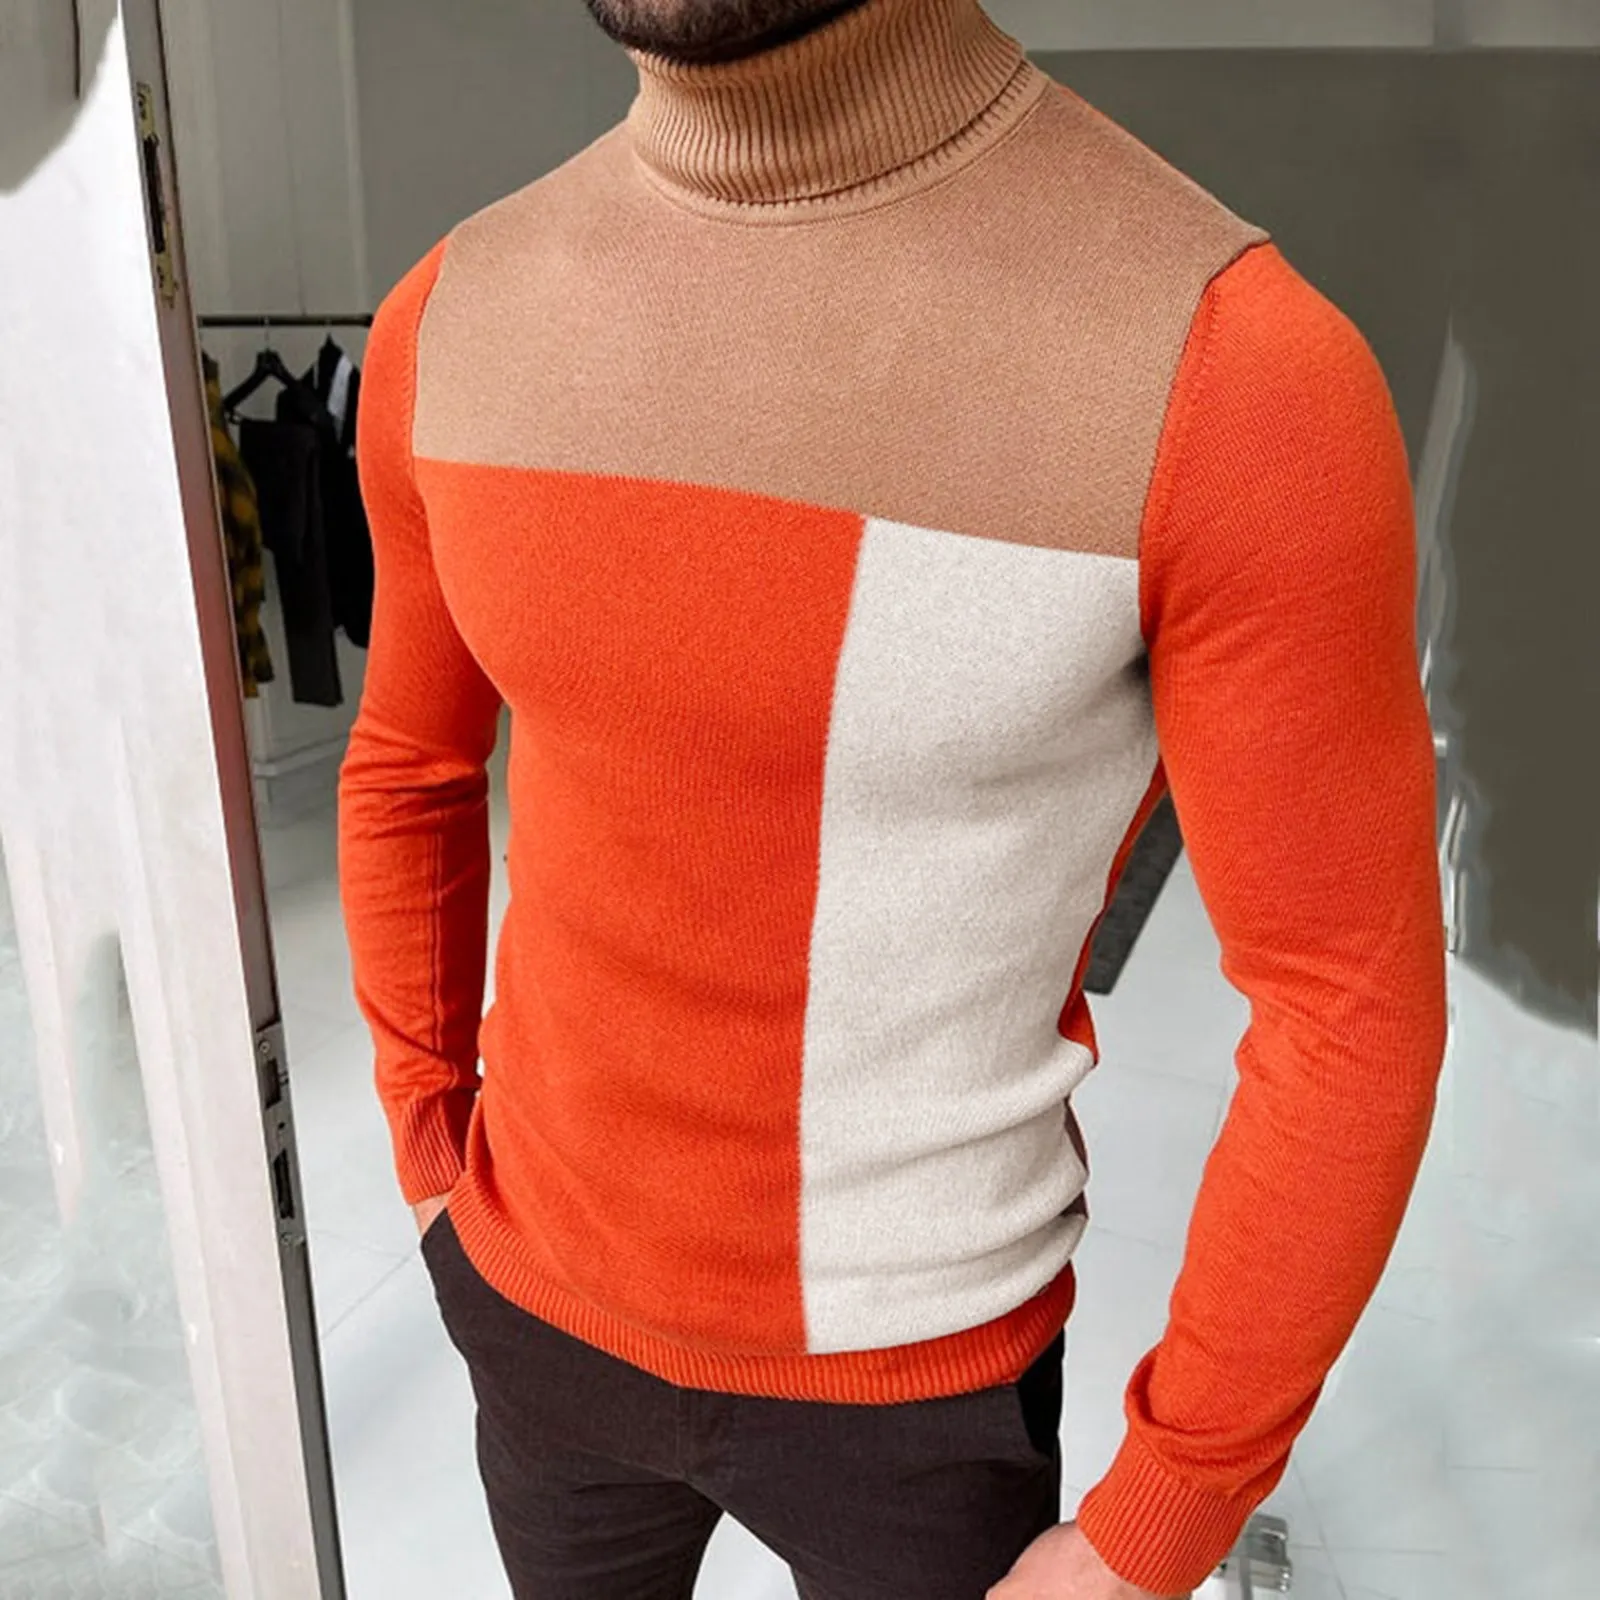 

New Winter Turtleneck Thick Mens Sweaters Casual Turtle Neck Splicing High Quality Warm Slim Sweaters Pullover Fashion Men